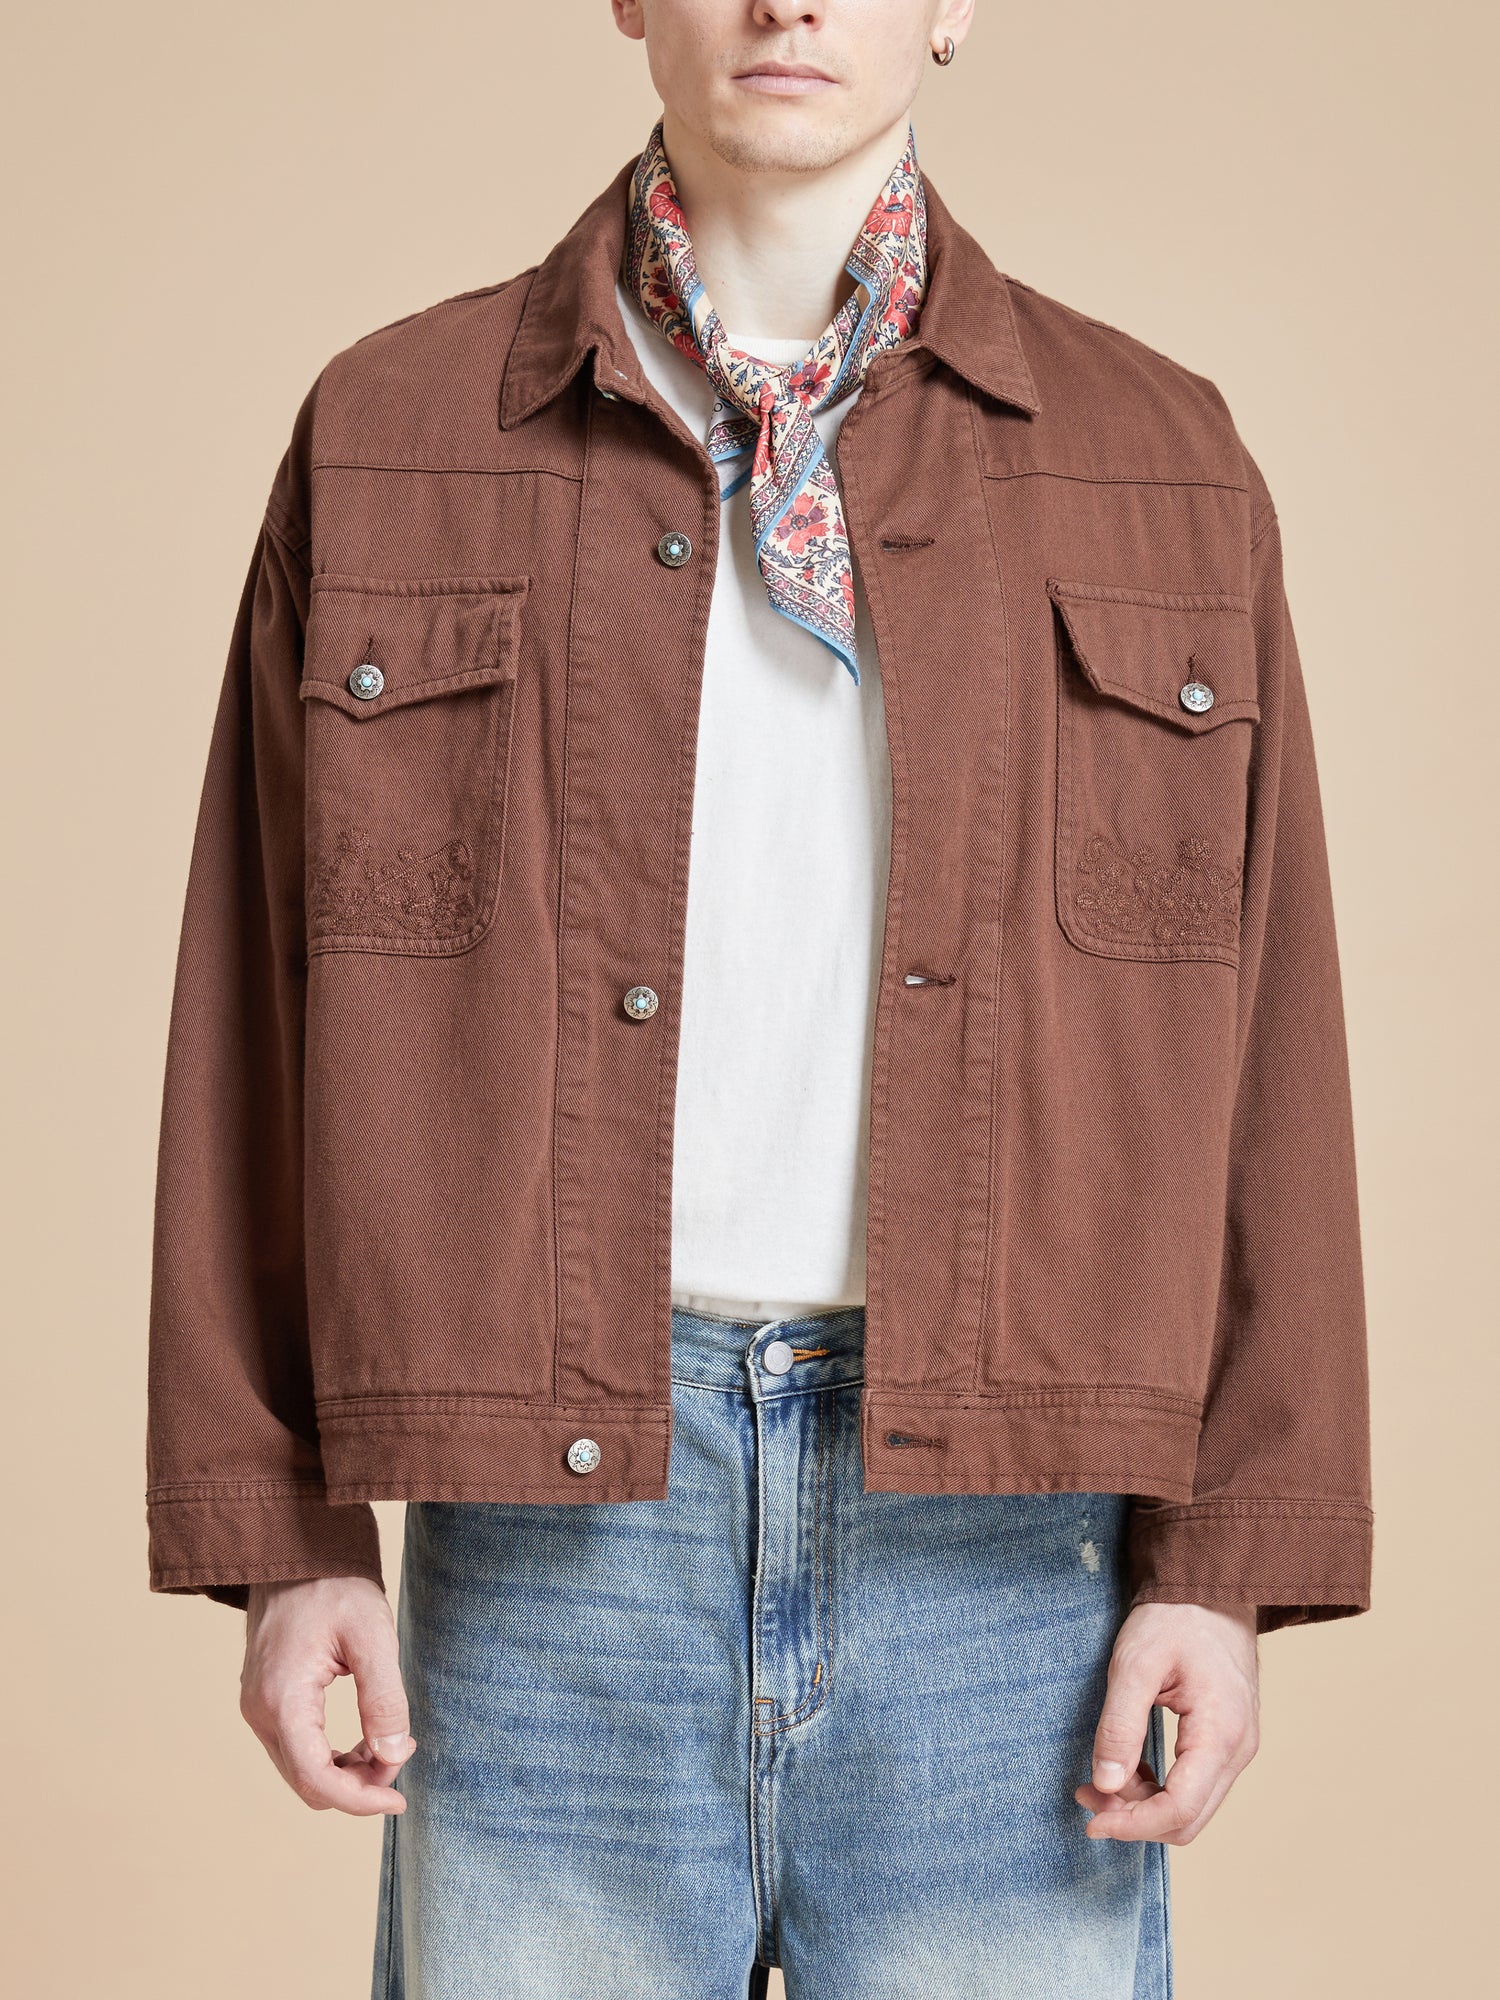 The model is wearing a brown jacket and jeans from Found.